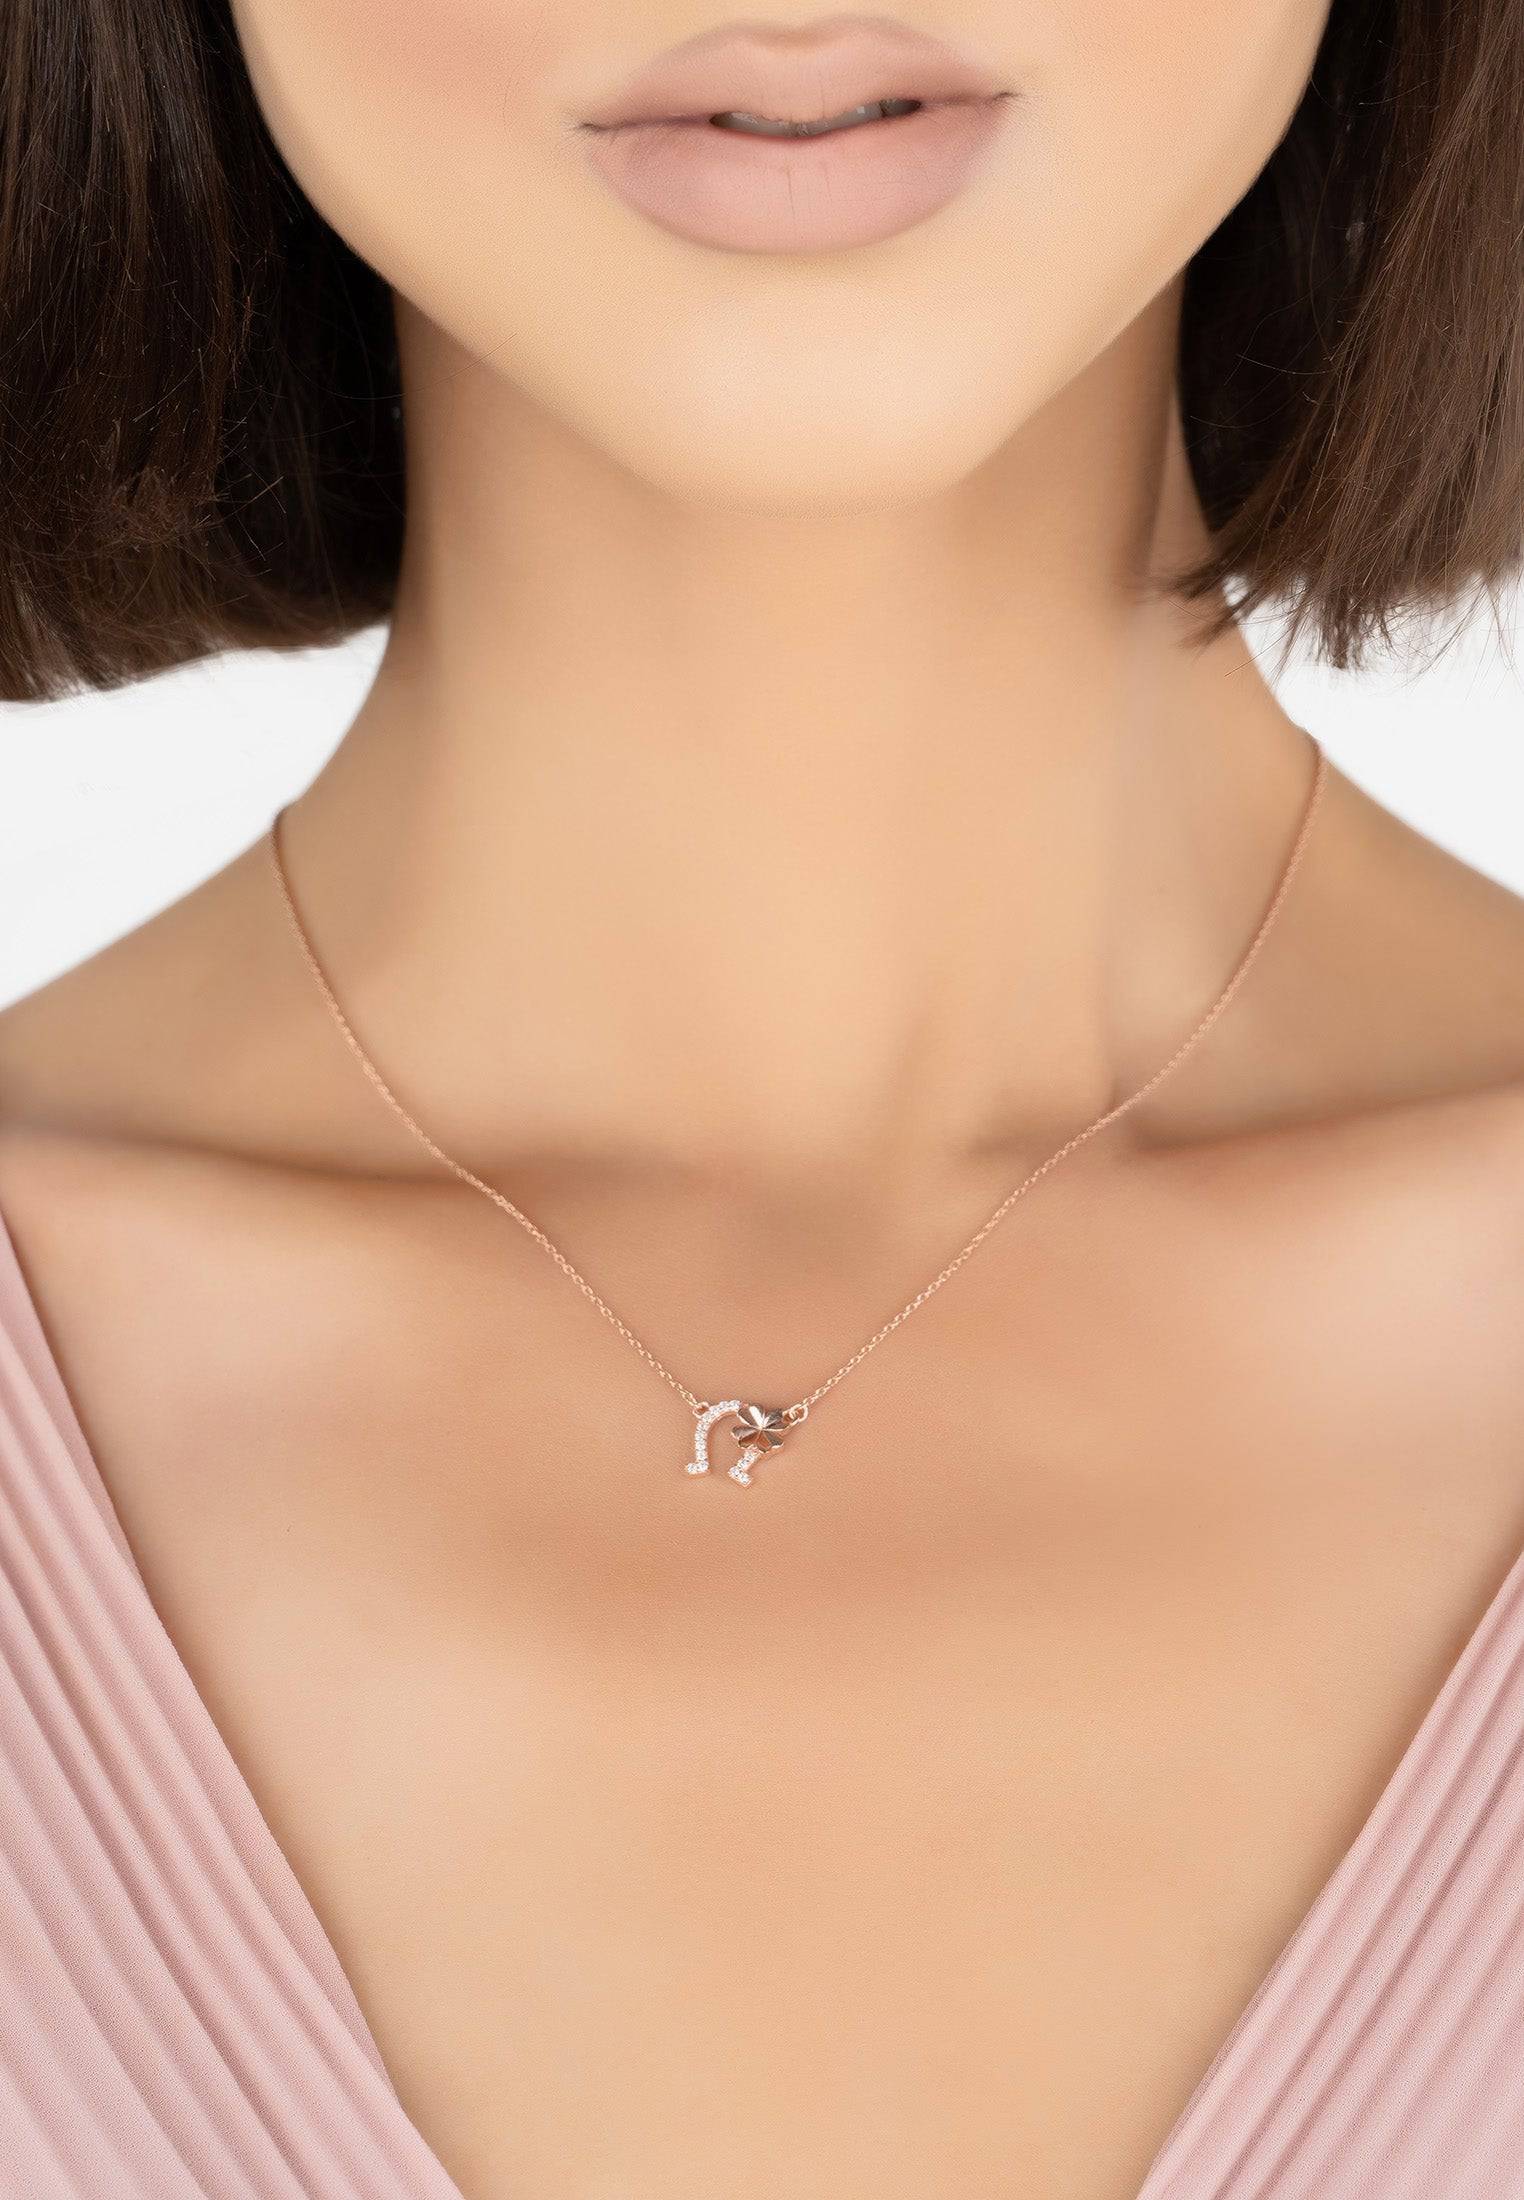 Rosegold Horseshoe and Shamrock Necklace with White Zirconia - Handcrafted Sterling Silver Talisman Jewelry - Jewelry & Watches - Bijou Her -  -  - 